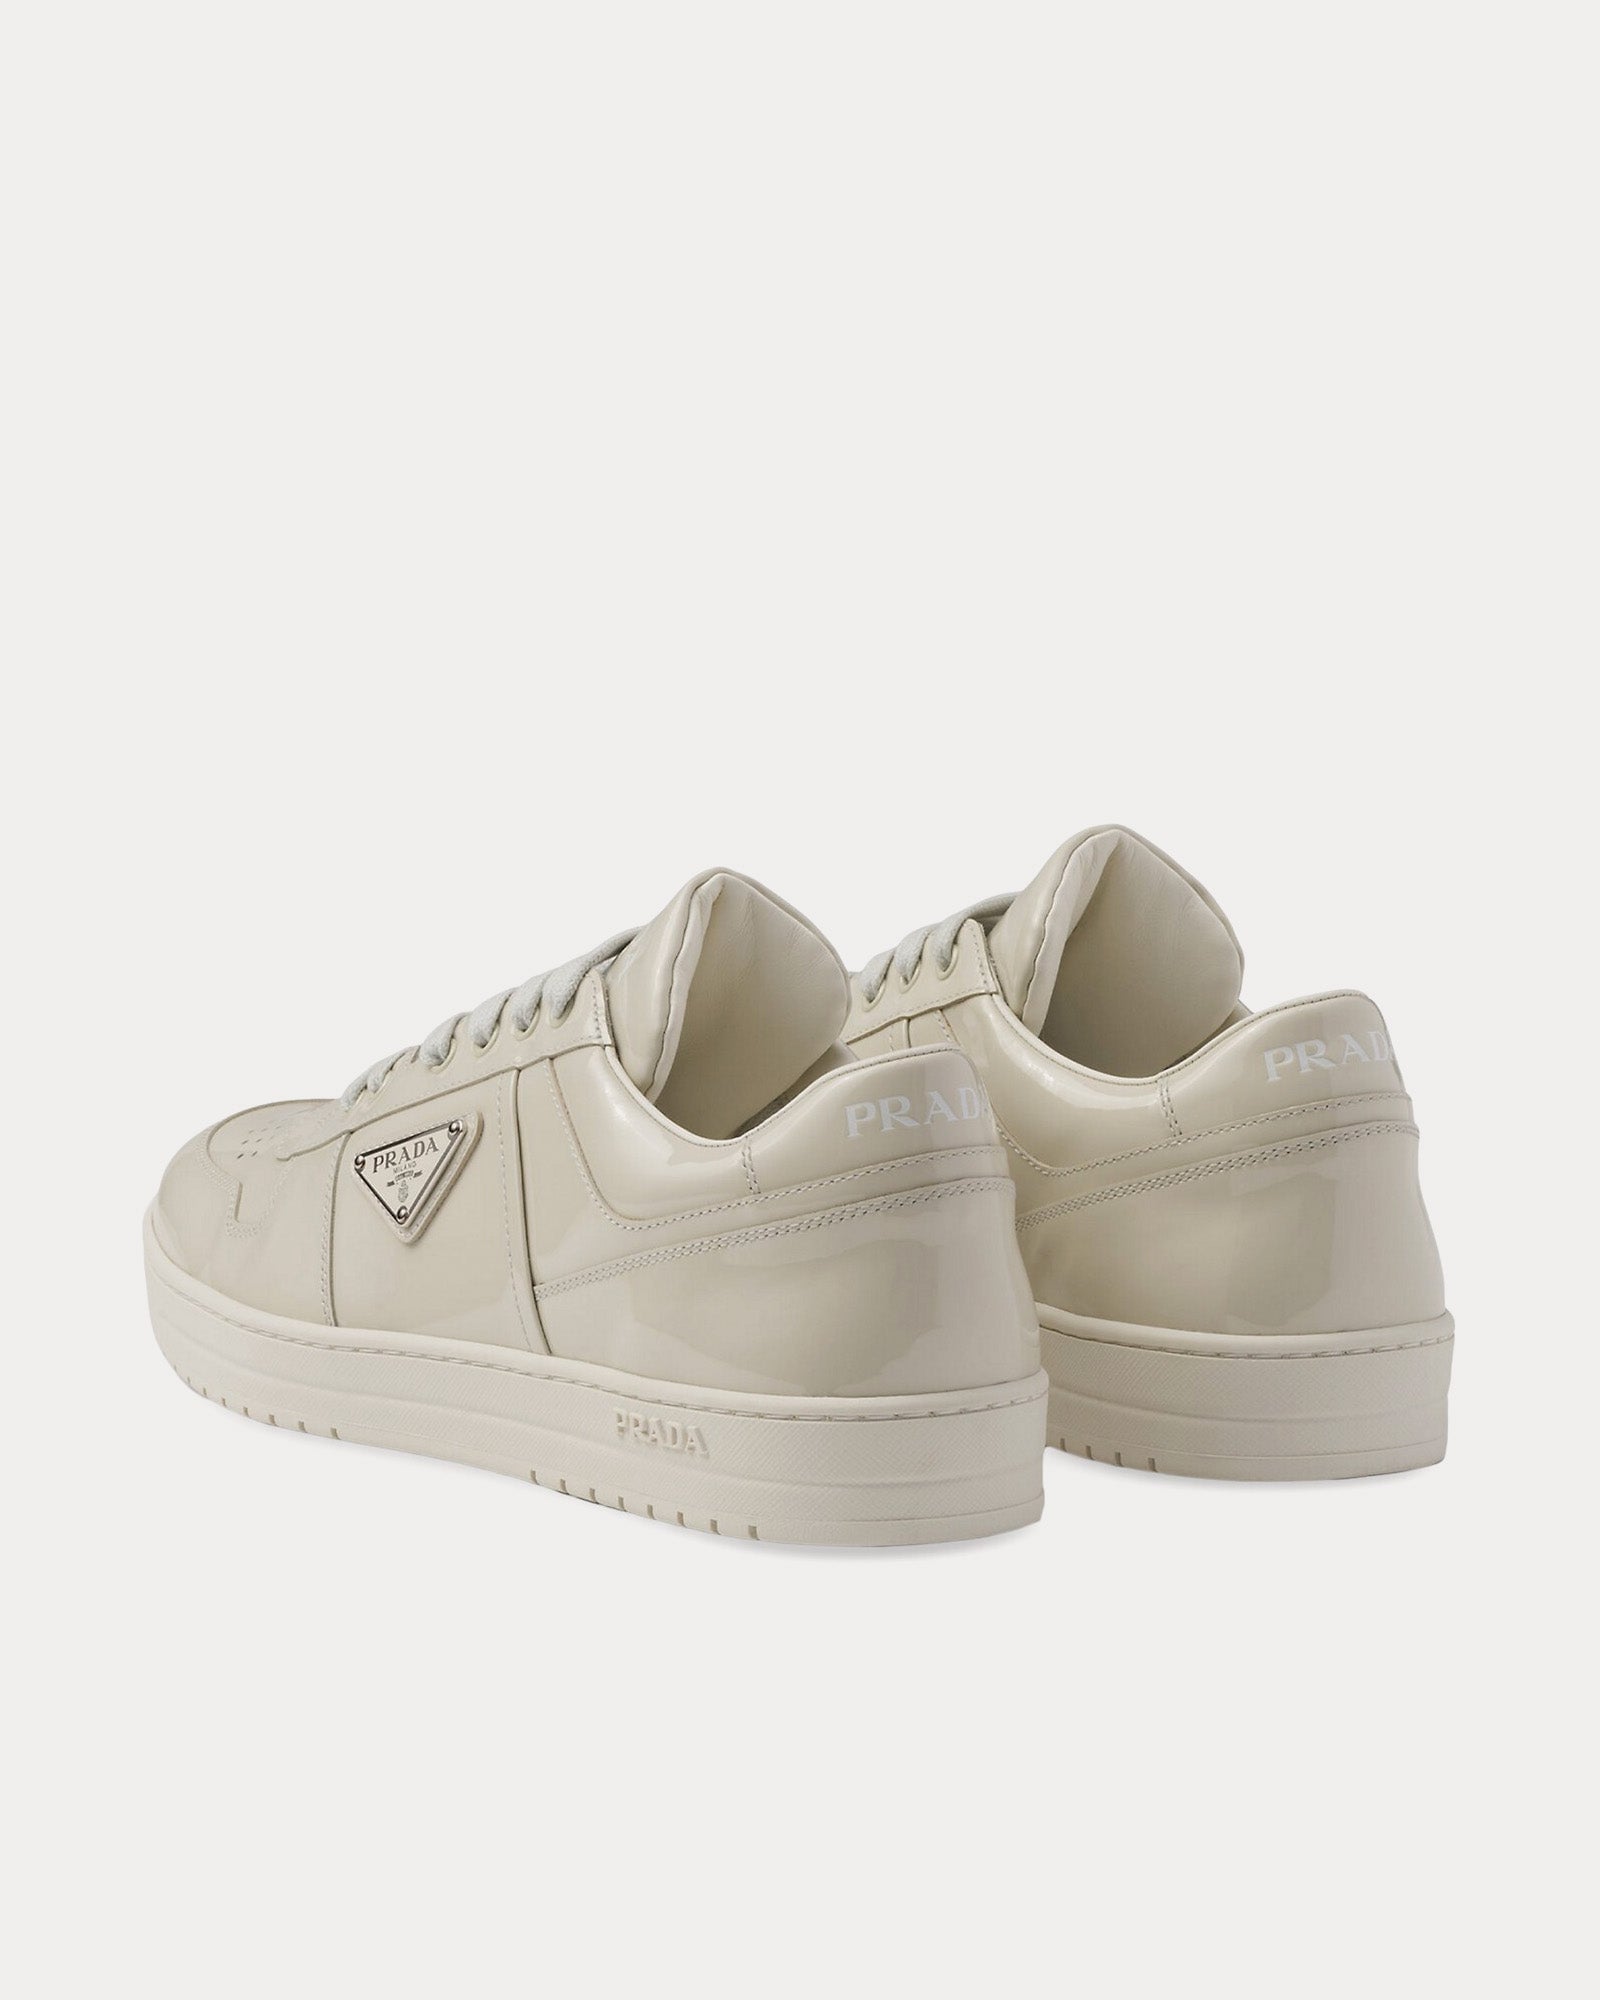 Prada - Downtown Patent Leather Alabaster Low Top Sneakers